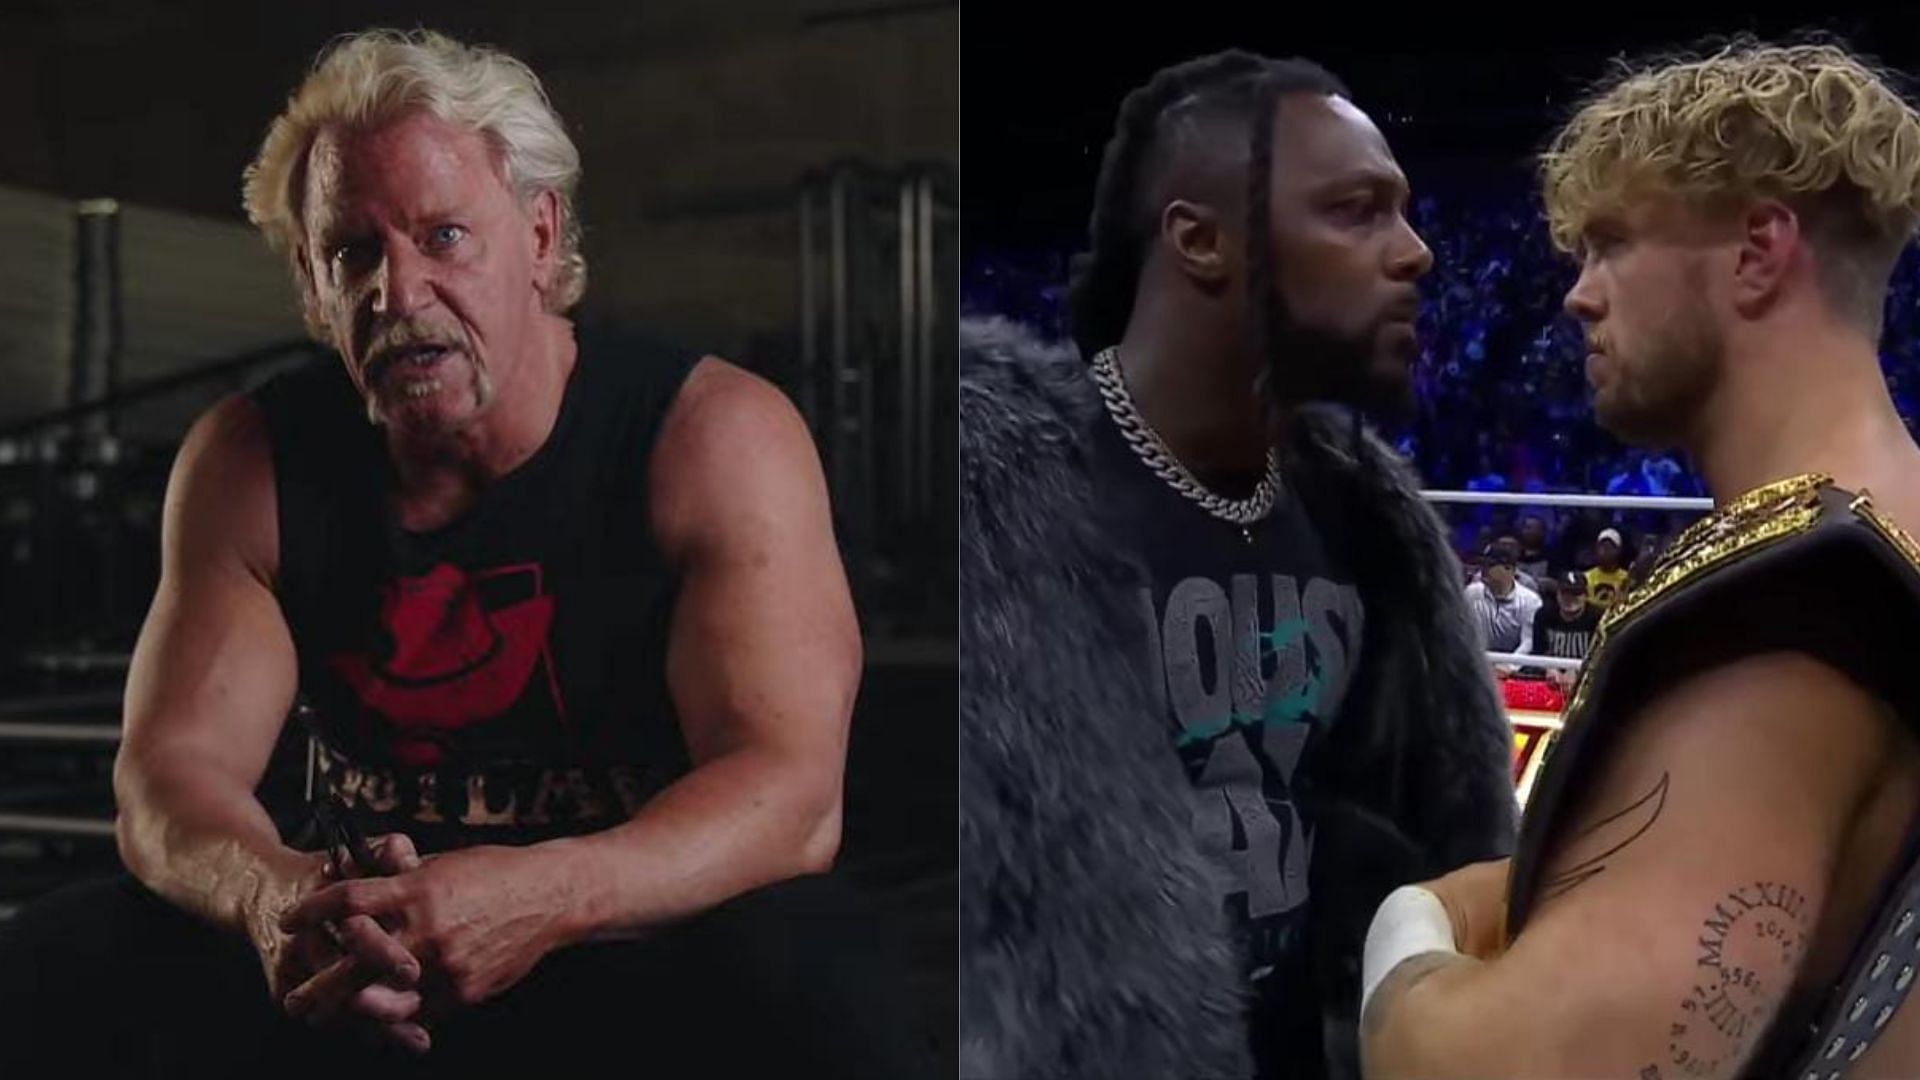 Jeff Jarrett will be a part of the third installment of the Owen Hart Cup. [Image credits: AEW YouTube channel]